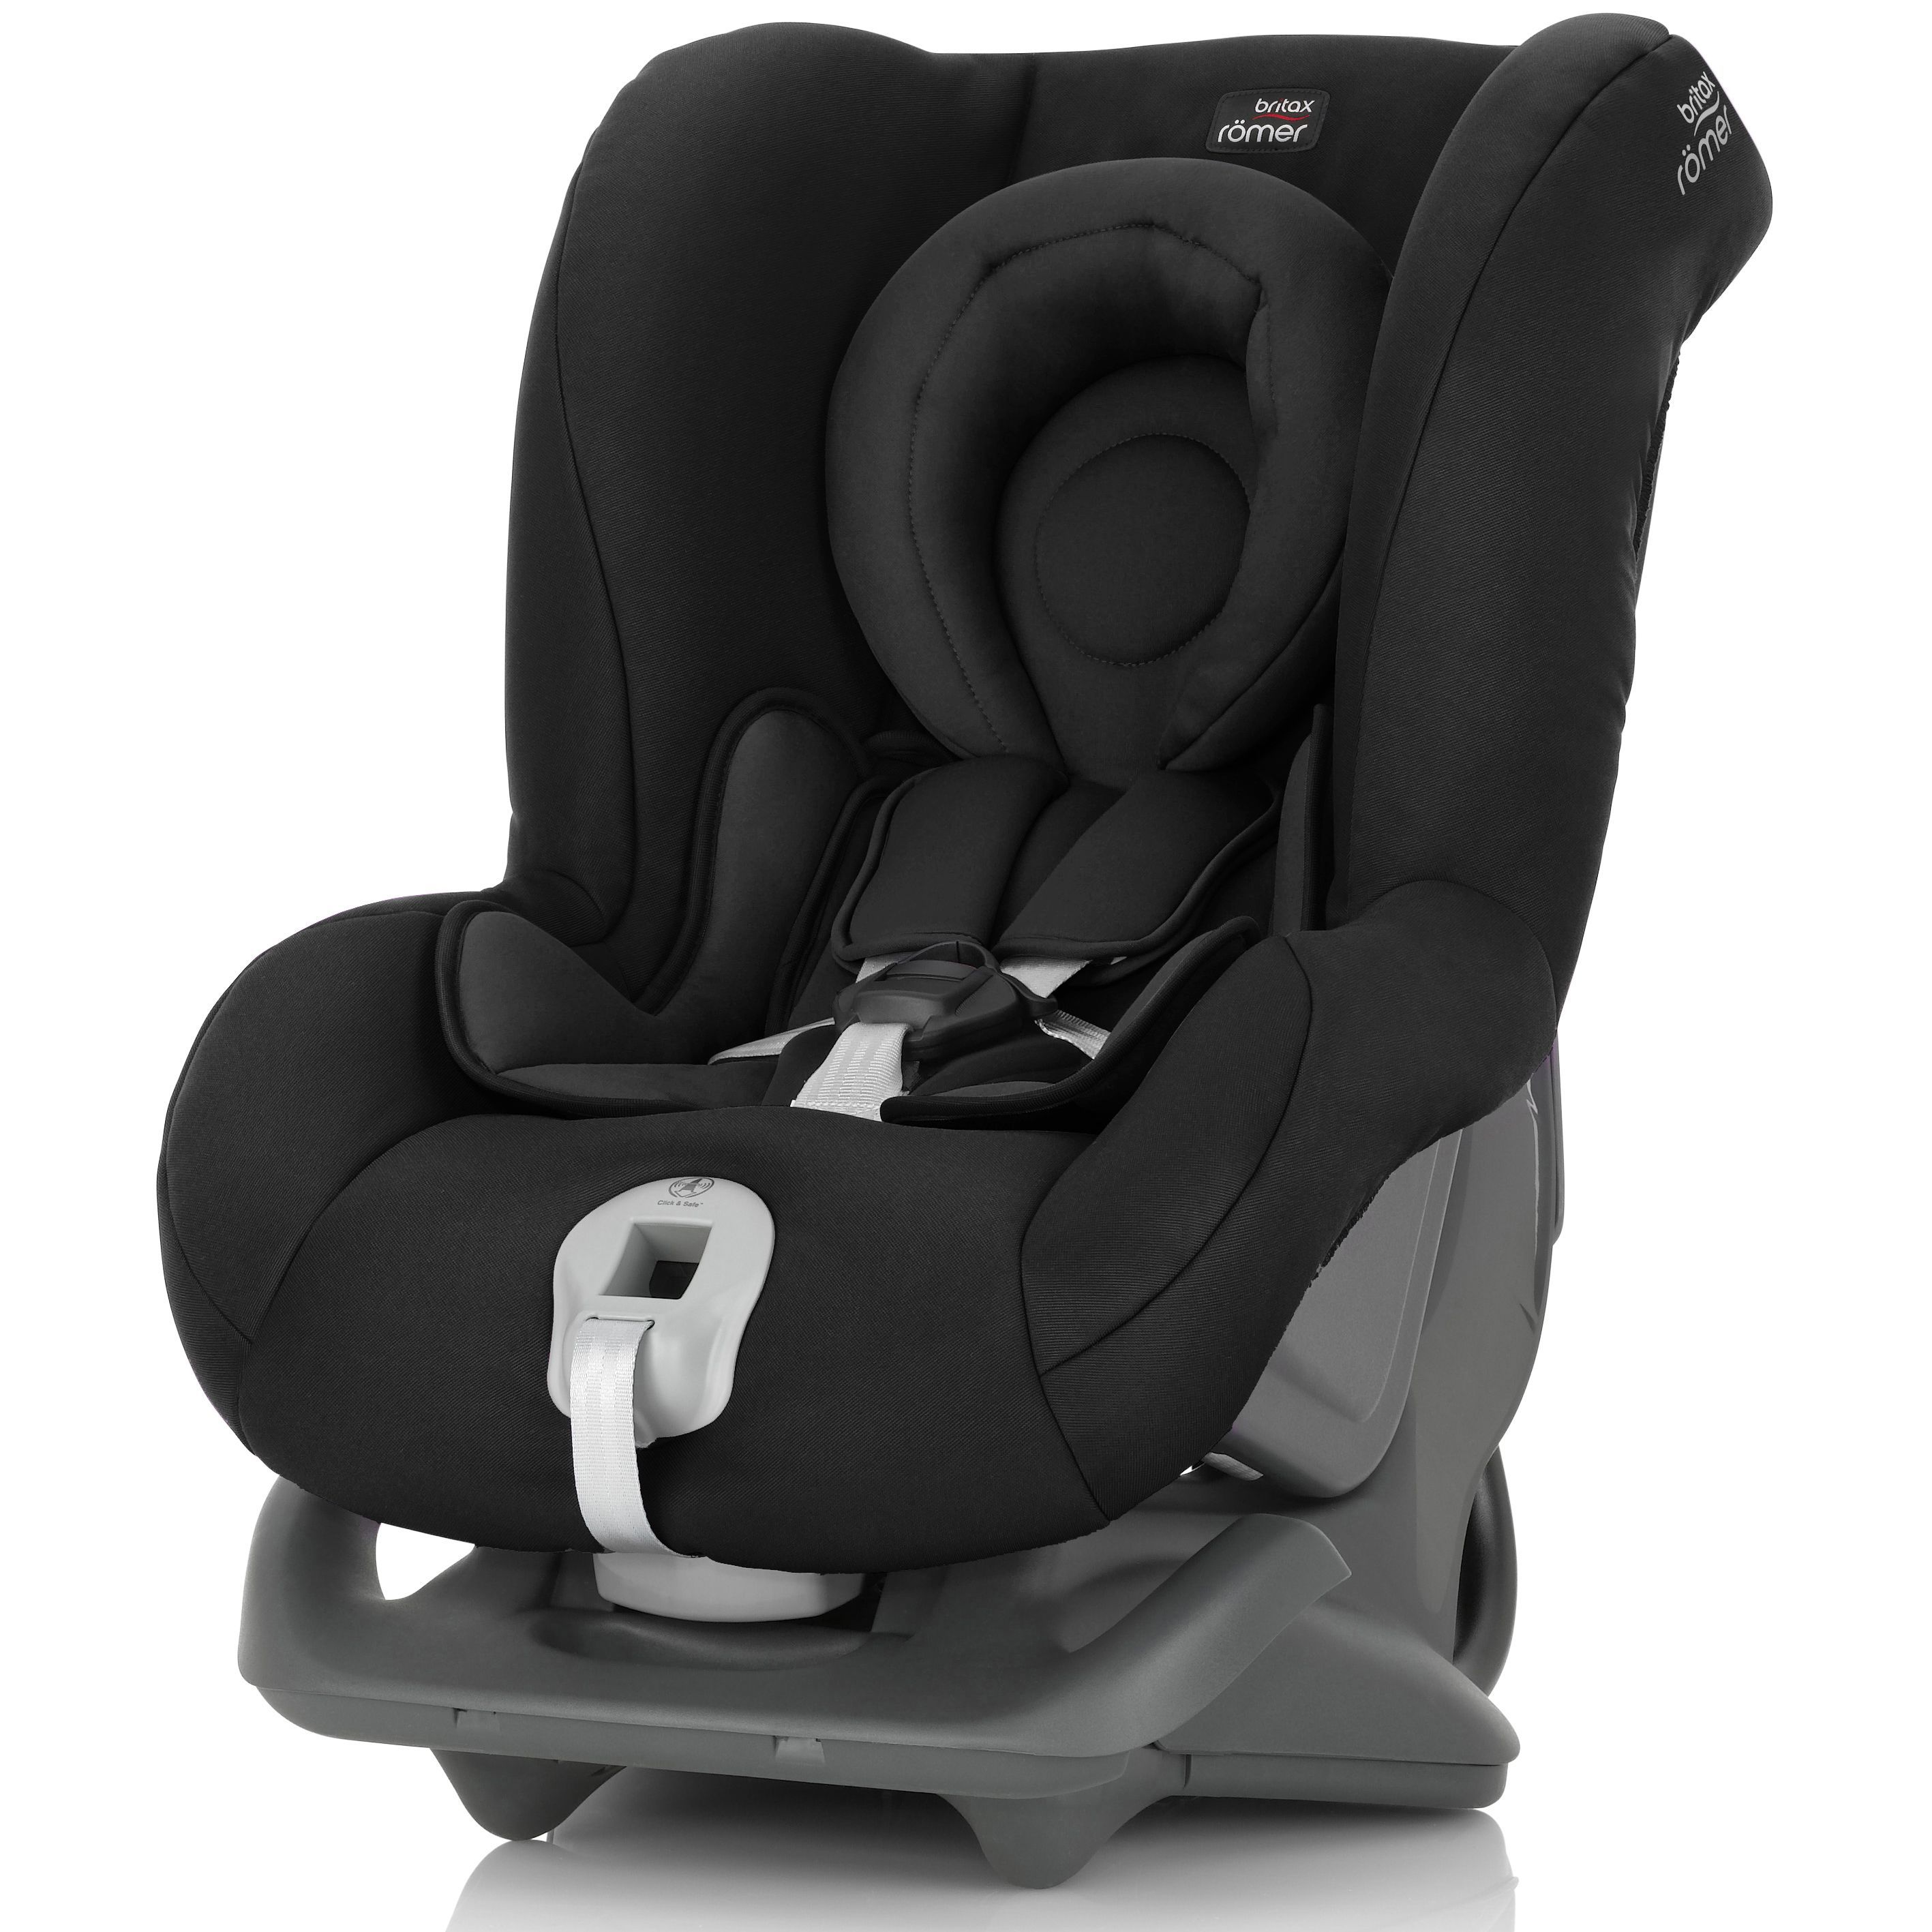 Design for Durability: Long-Lasting Car Seats That Withstand Wear and Tear